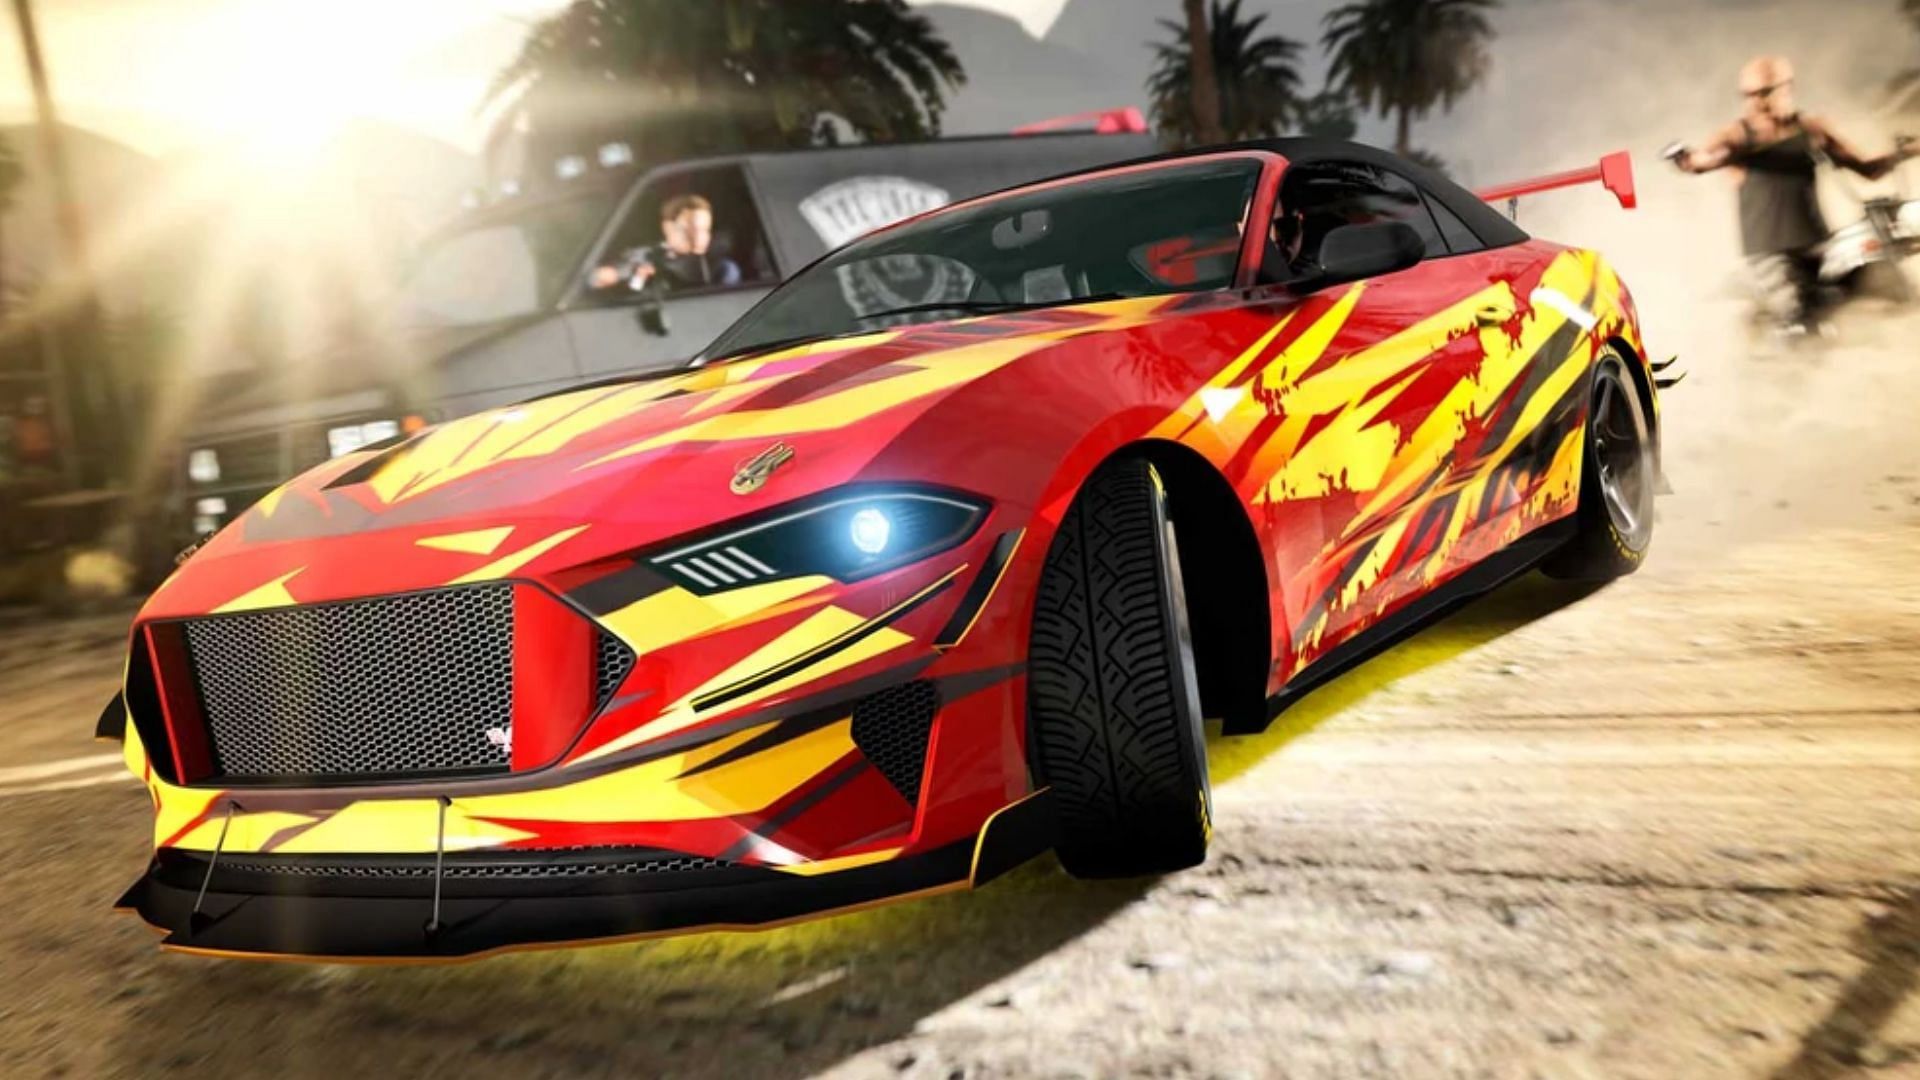 The Vapid Dominator GT in its full glory in Grand Theft Auto 5 Online (Image via Rockstar Games)